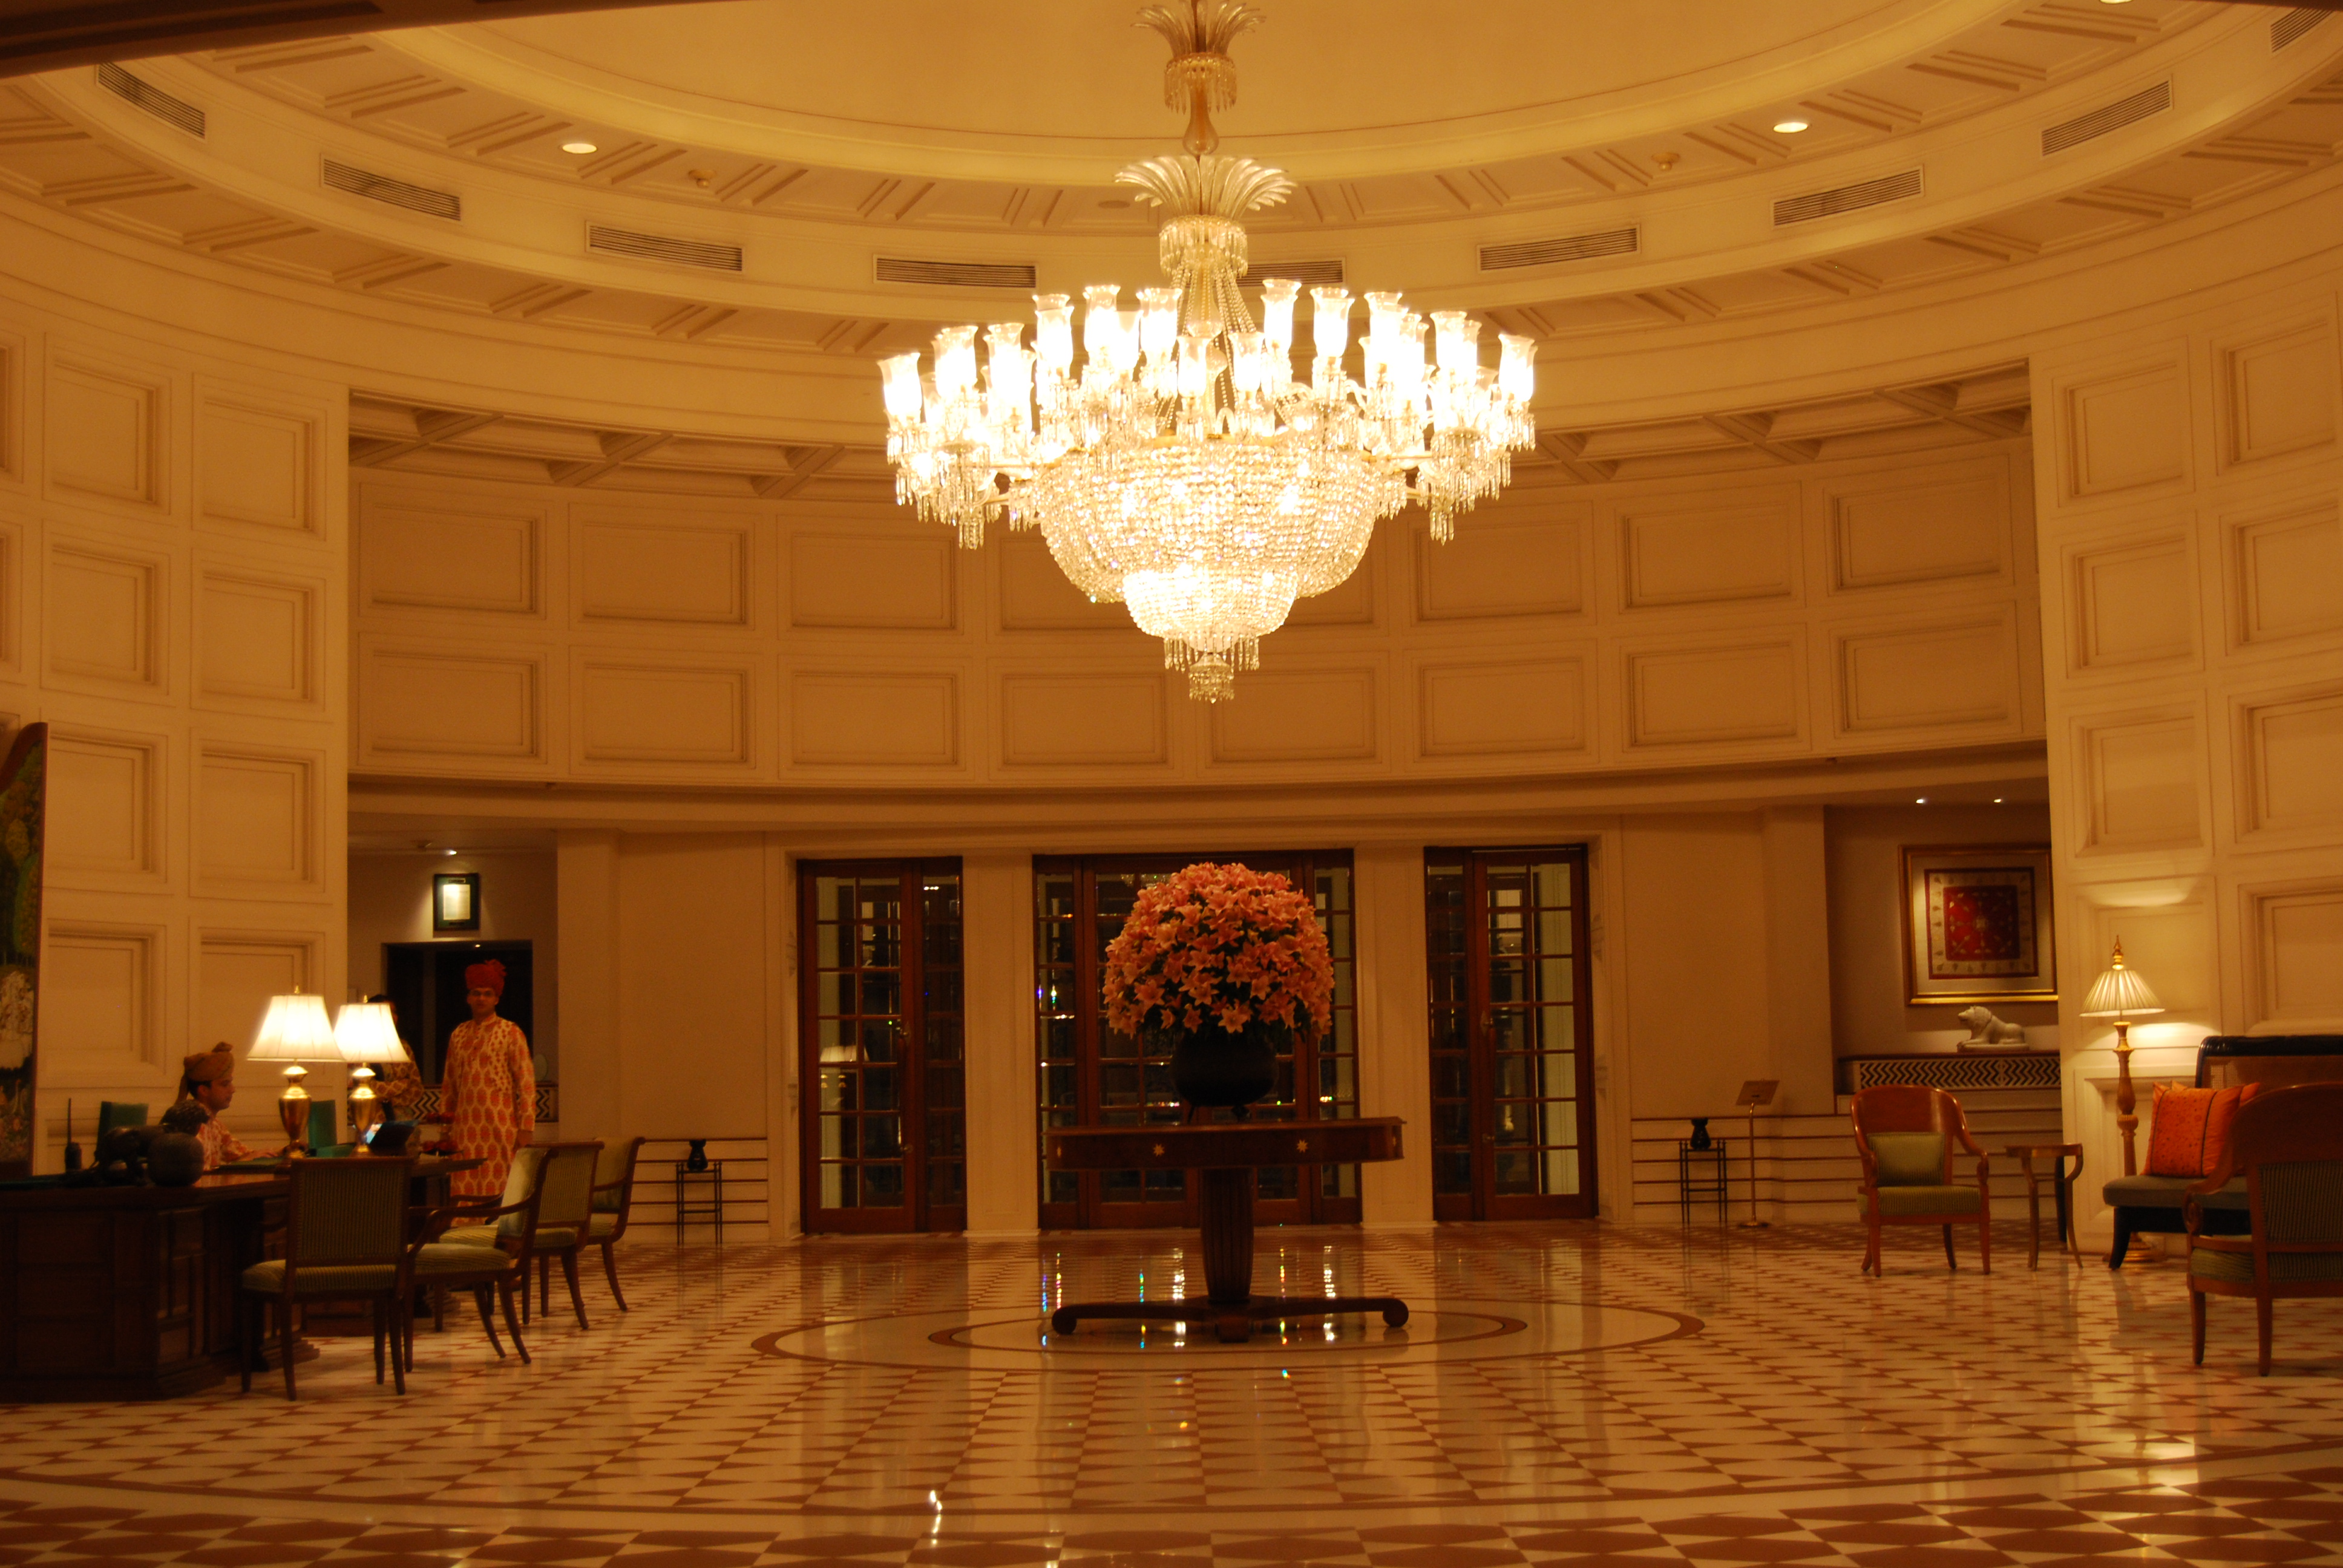 Lobby at The Oberoi Amarvilas, Agra